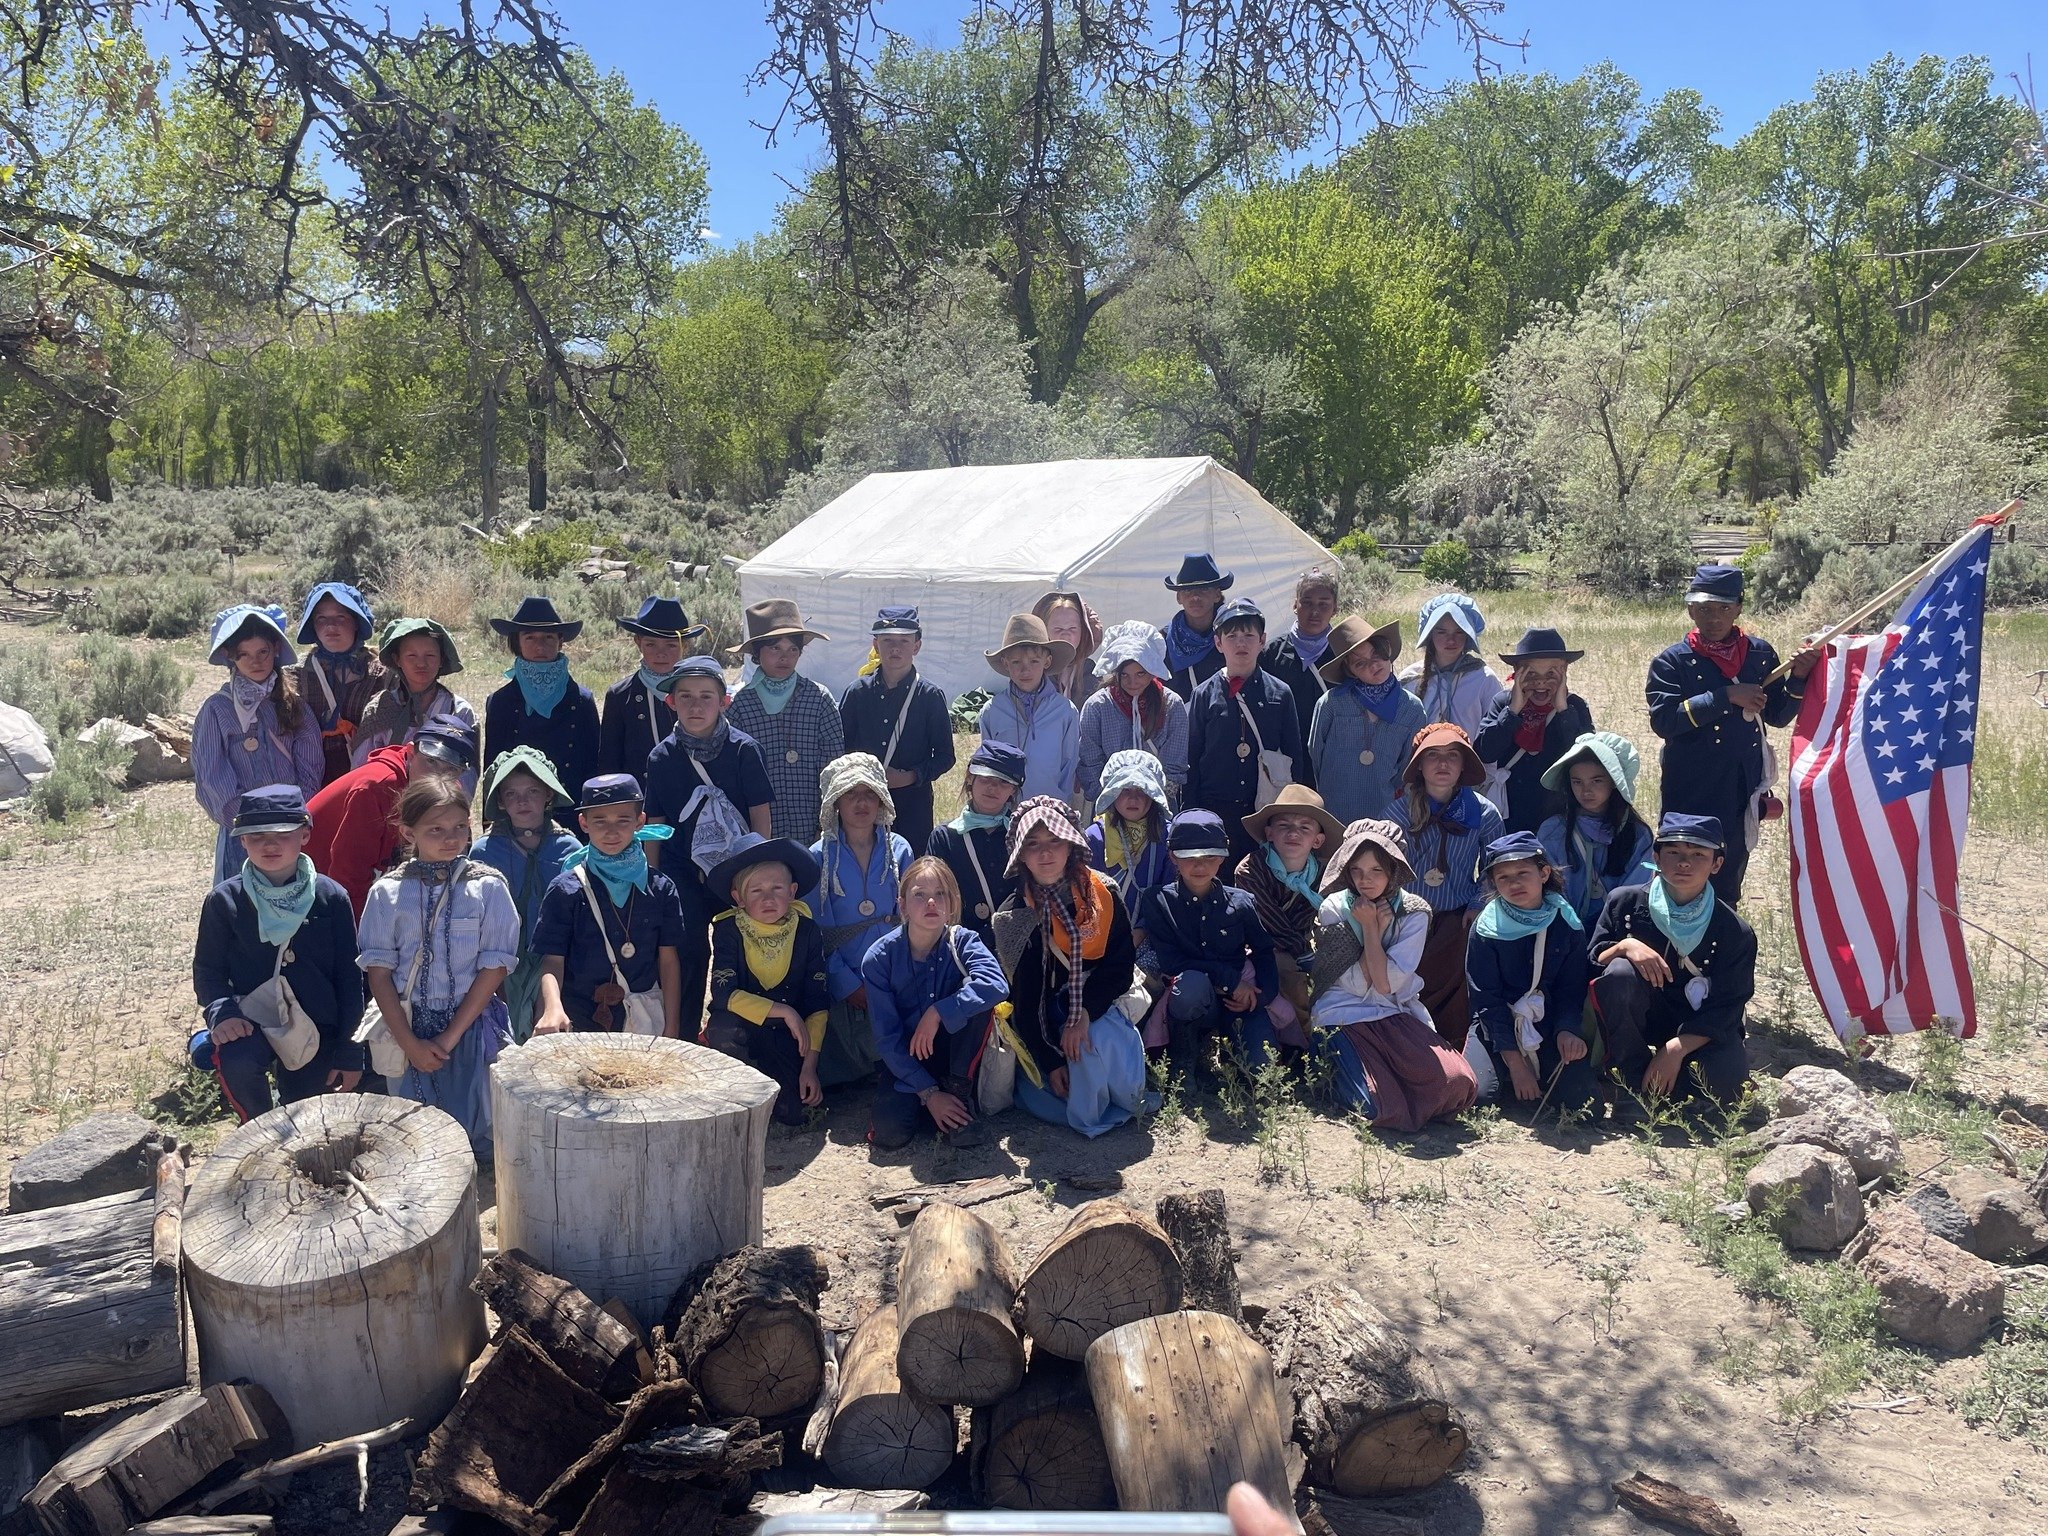 Our 4th and 5th grade pioneers and Union soldiers successfully made it home from the &ldquo;Utah territory&rdquo;. They are a hardy group and had a great time!